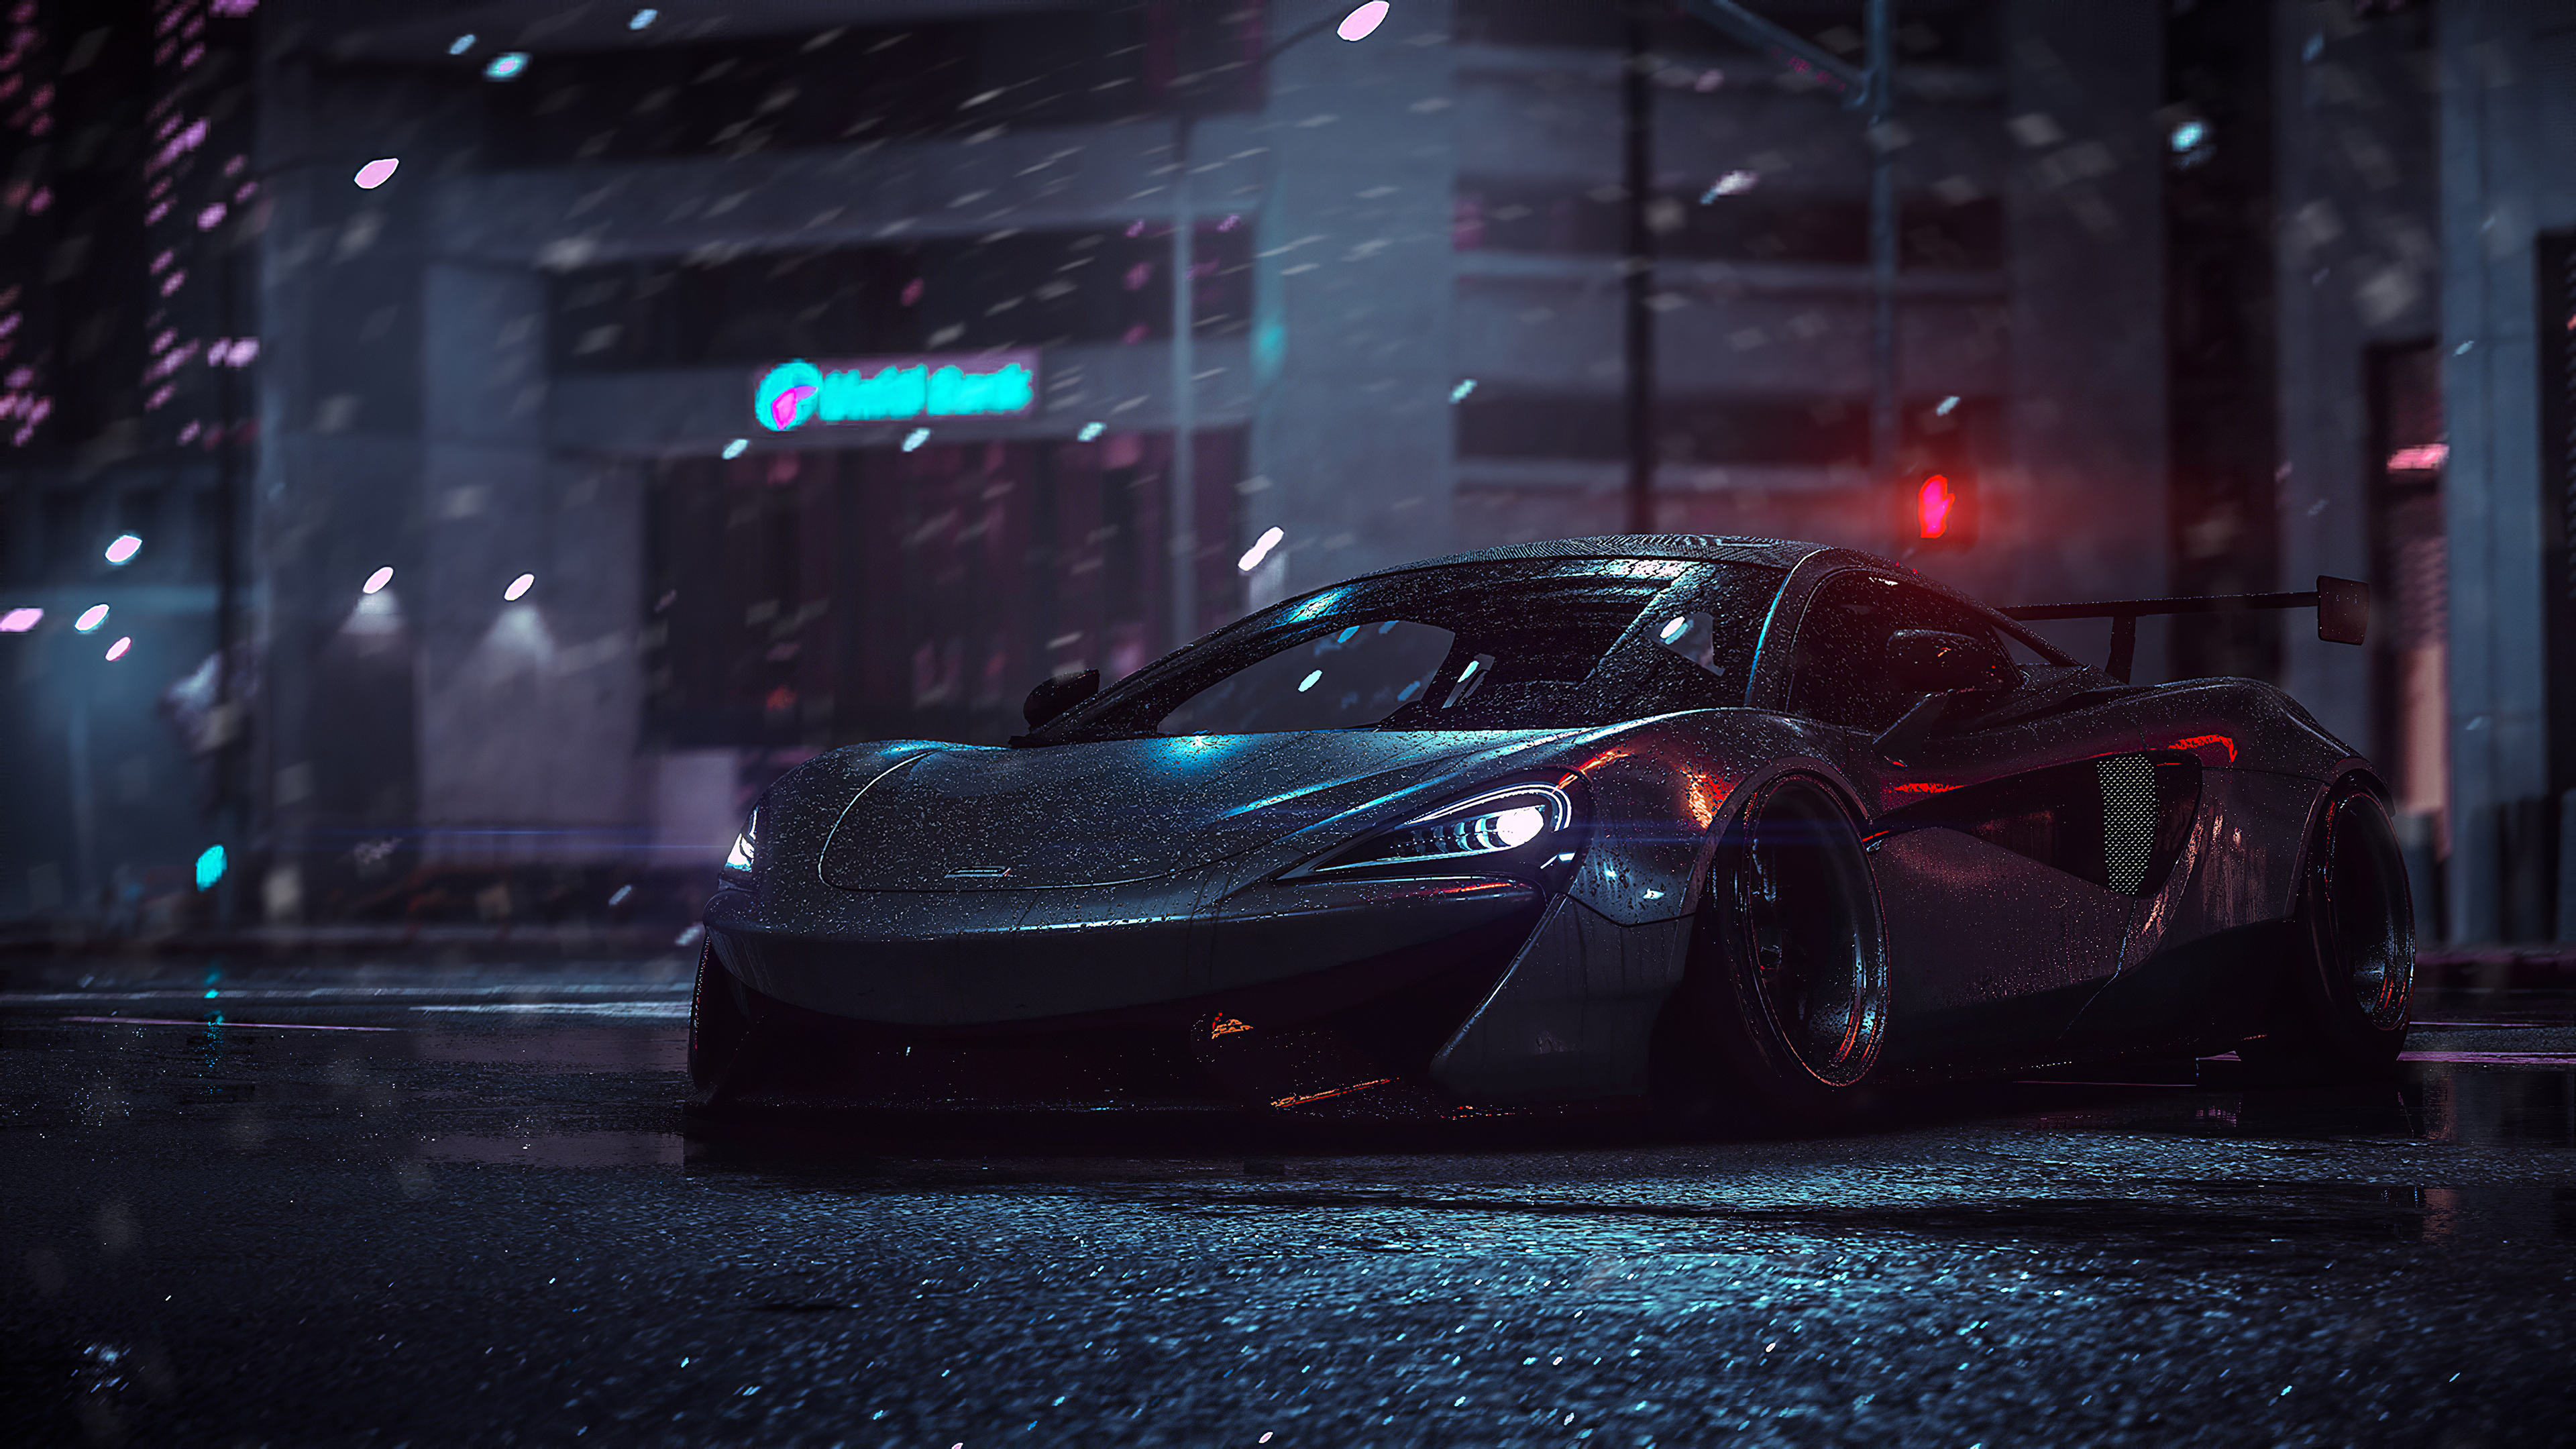 Wallpaper 4k Mclaren 570s Need For Speed 2019 Cars Wallpapers 4k Images, Photos, Reviews